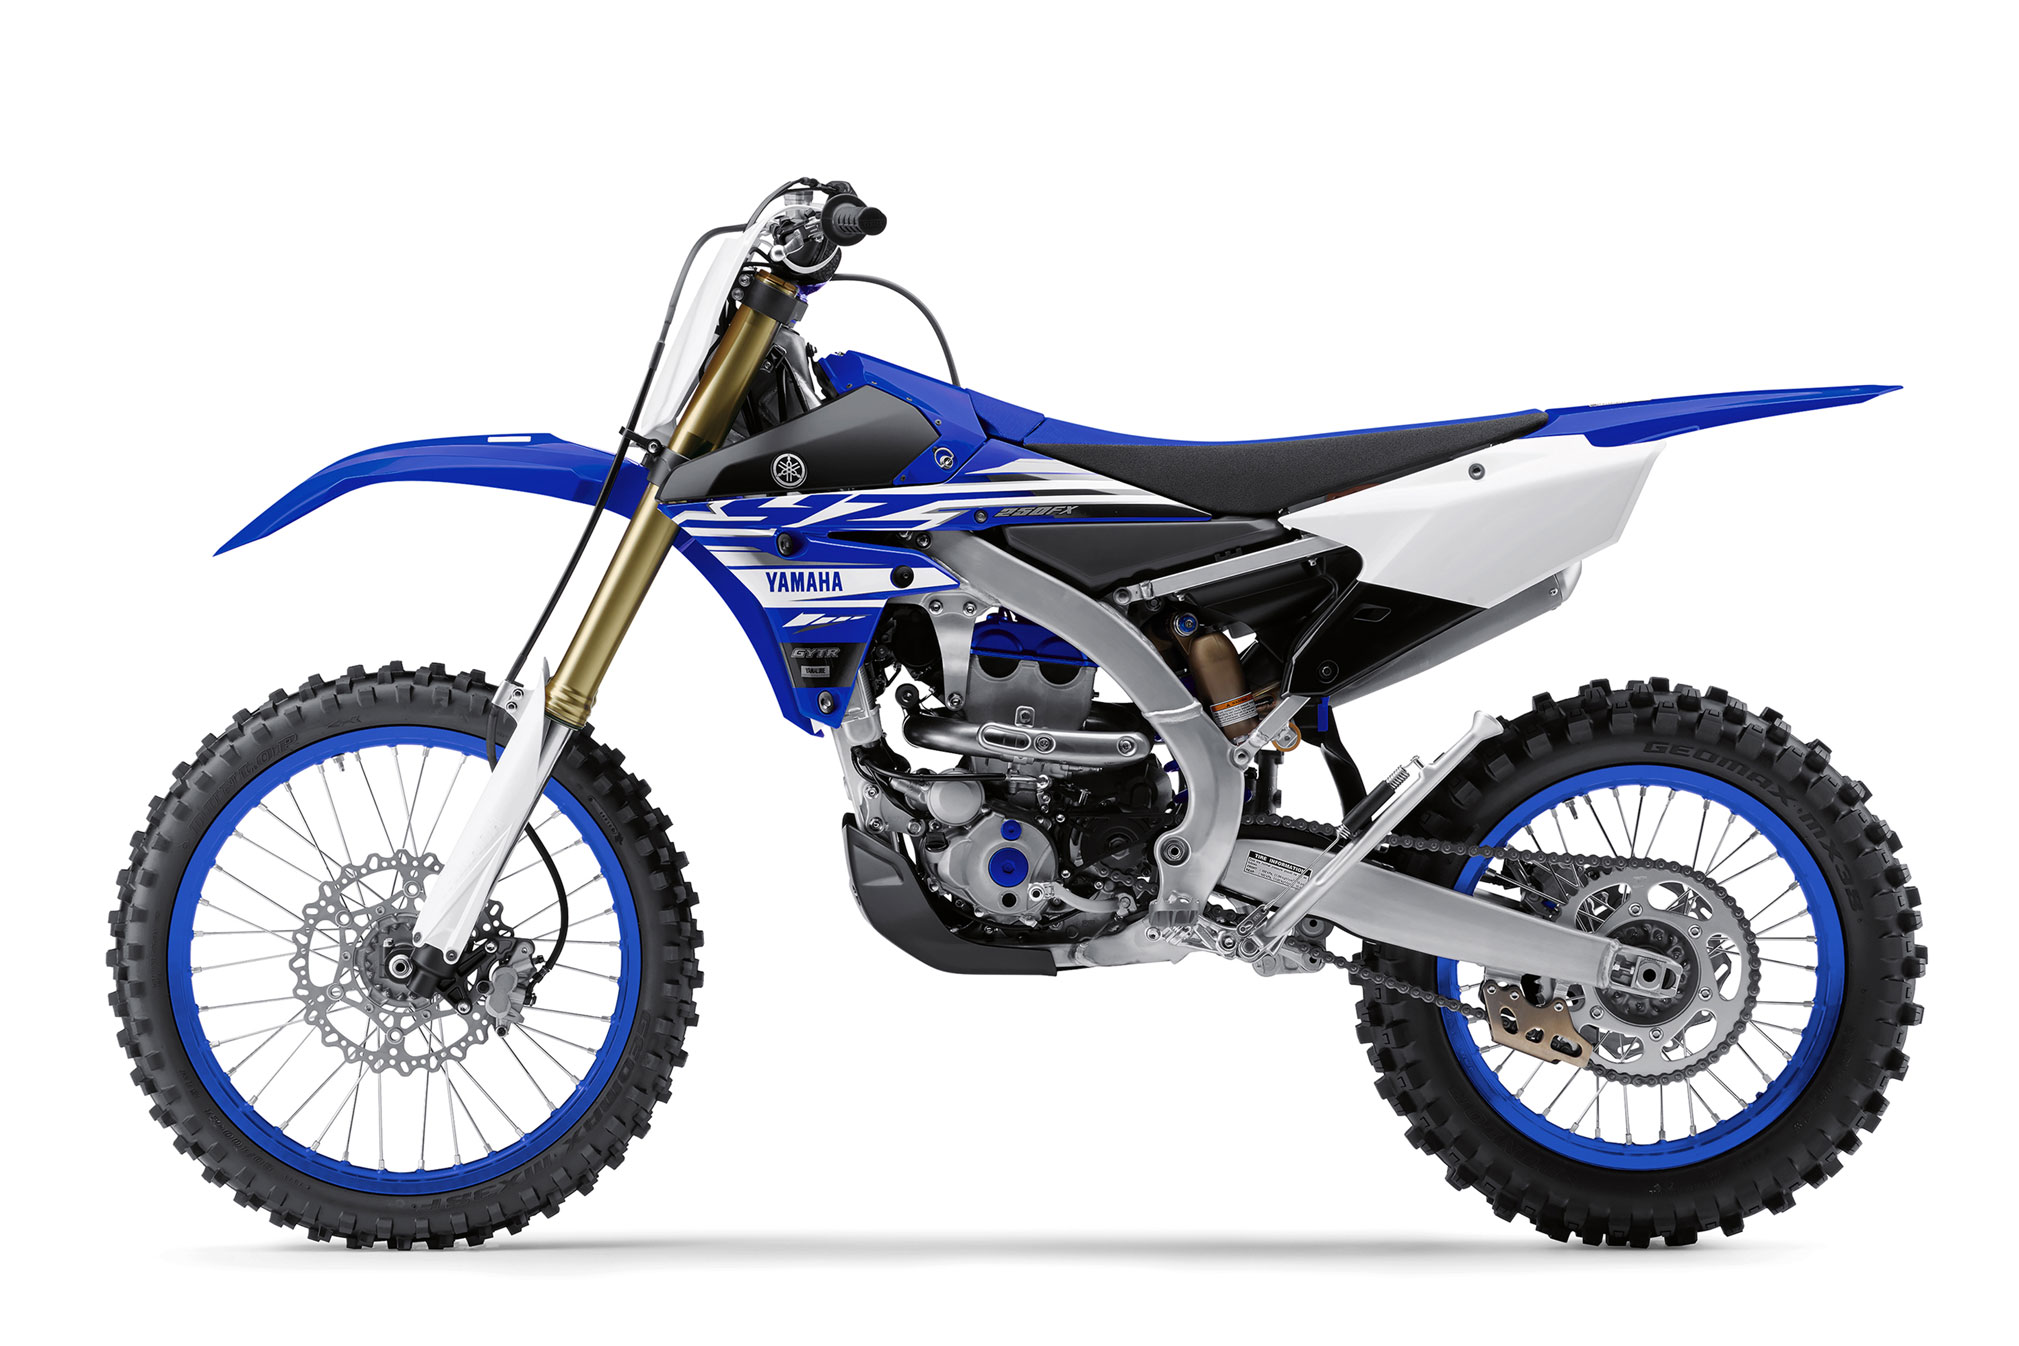 2019 Yamaha YZ250FX Guide • Total Motorcycle